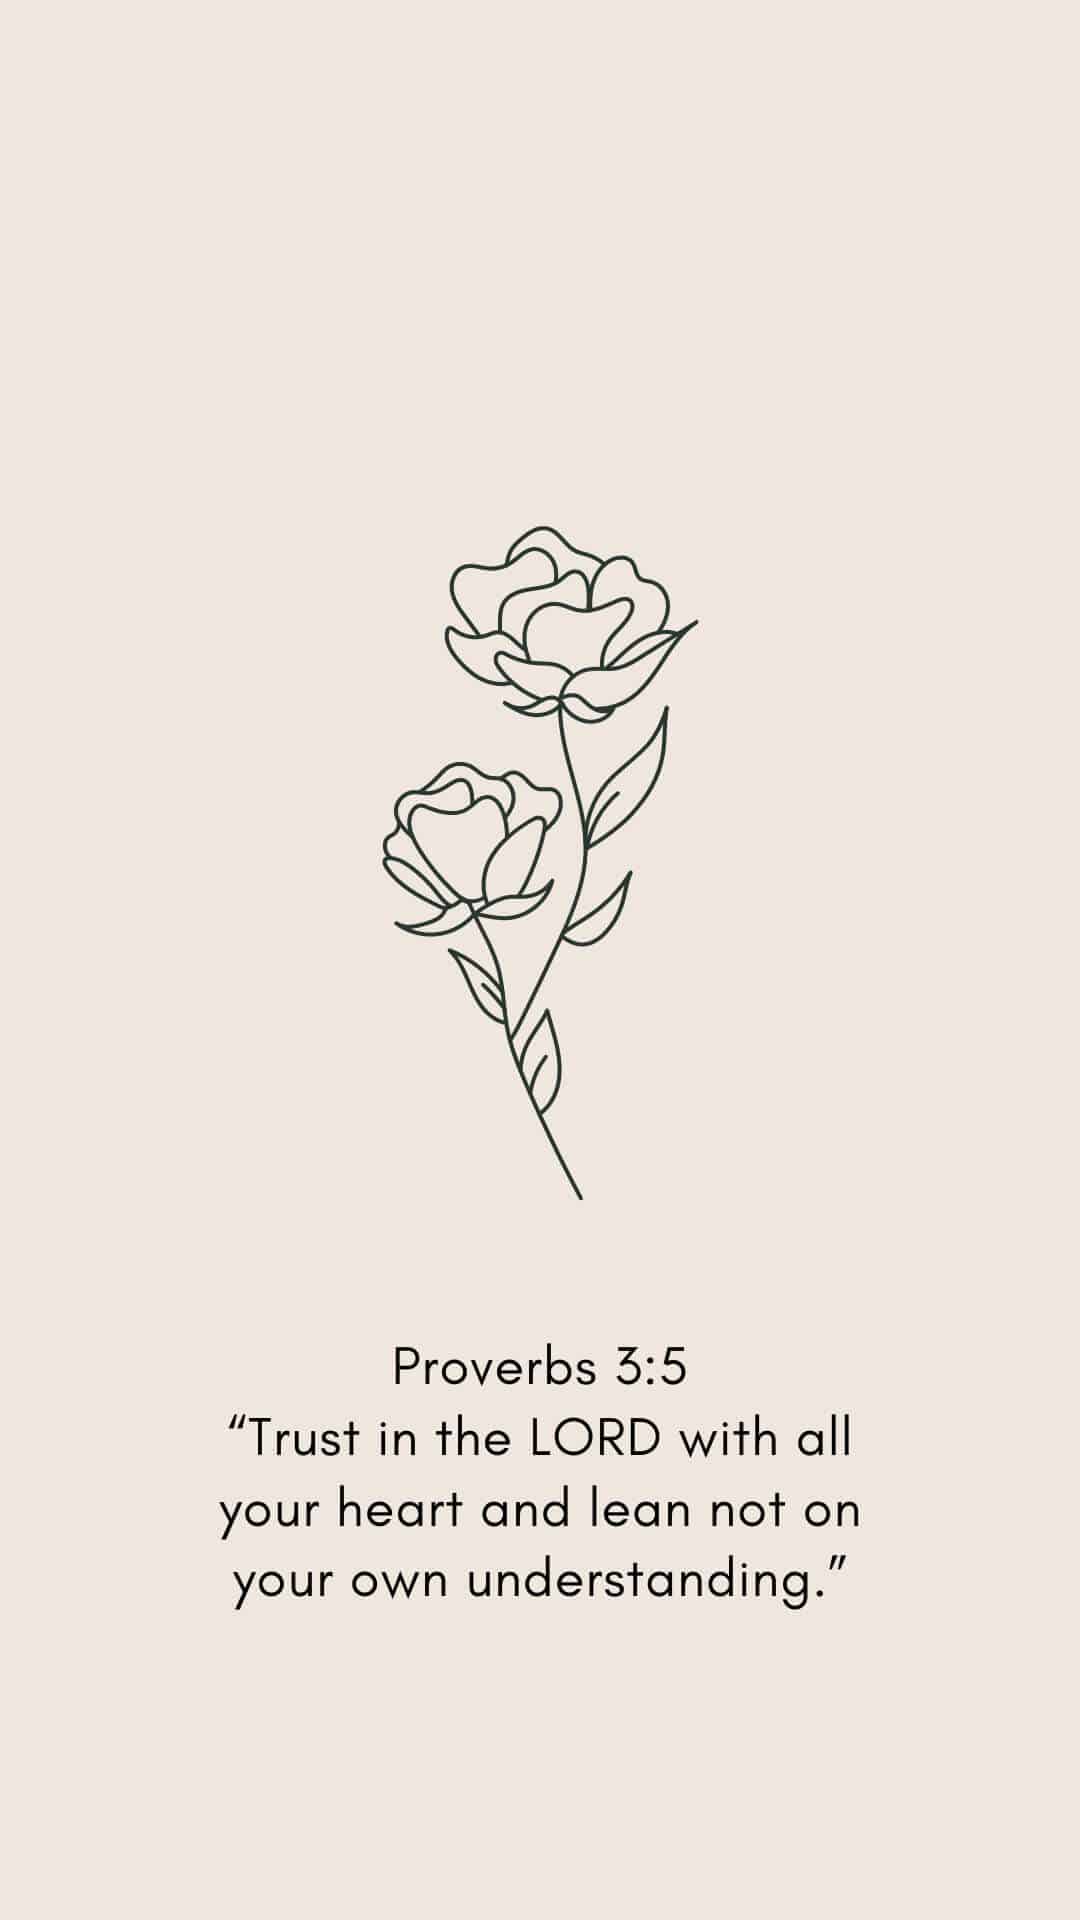 Proverbs 3:5:“Trust in the LORD with all your heart and lean not on your own understanding.”